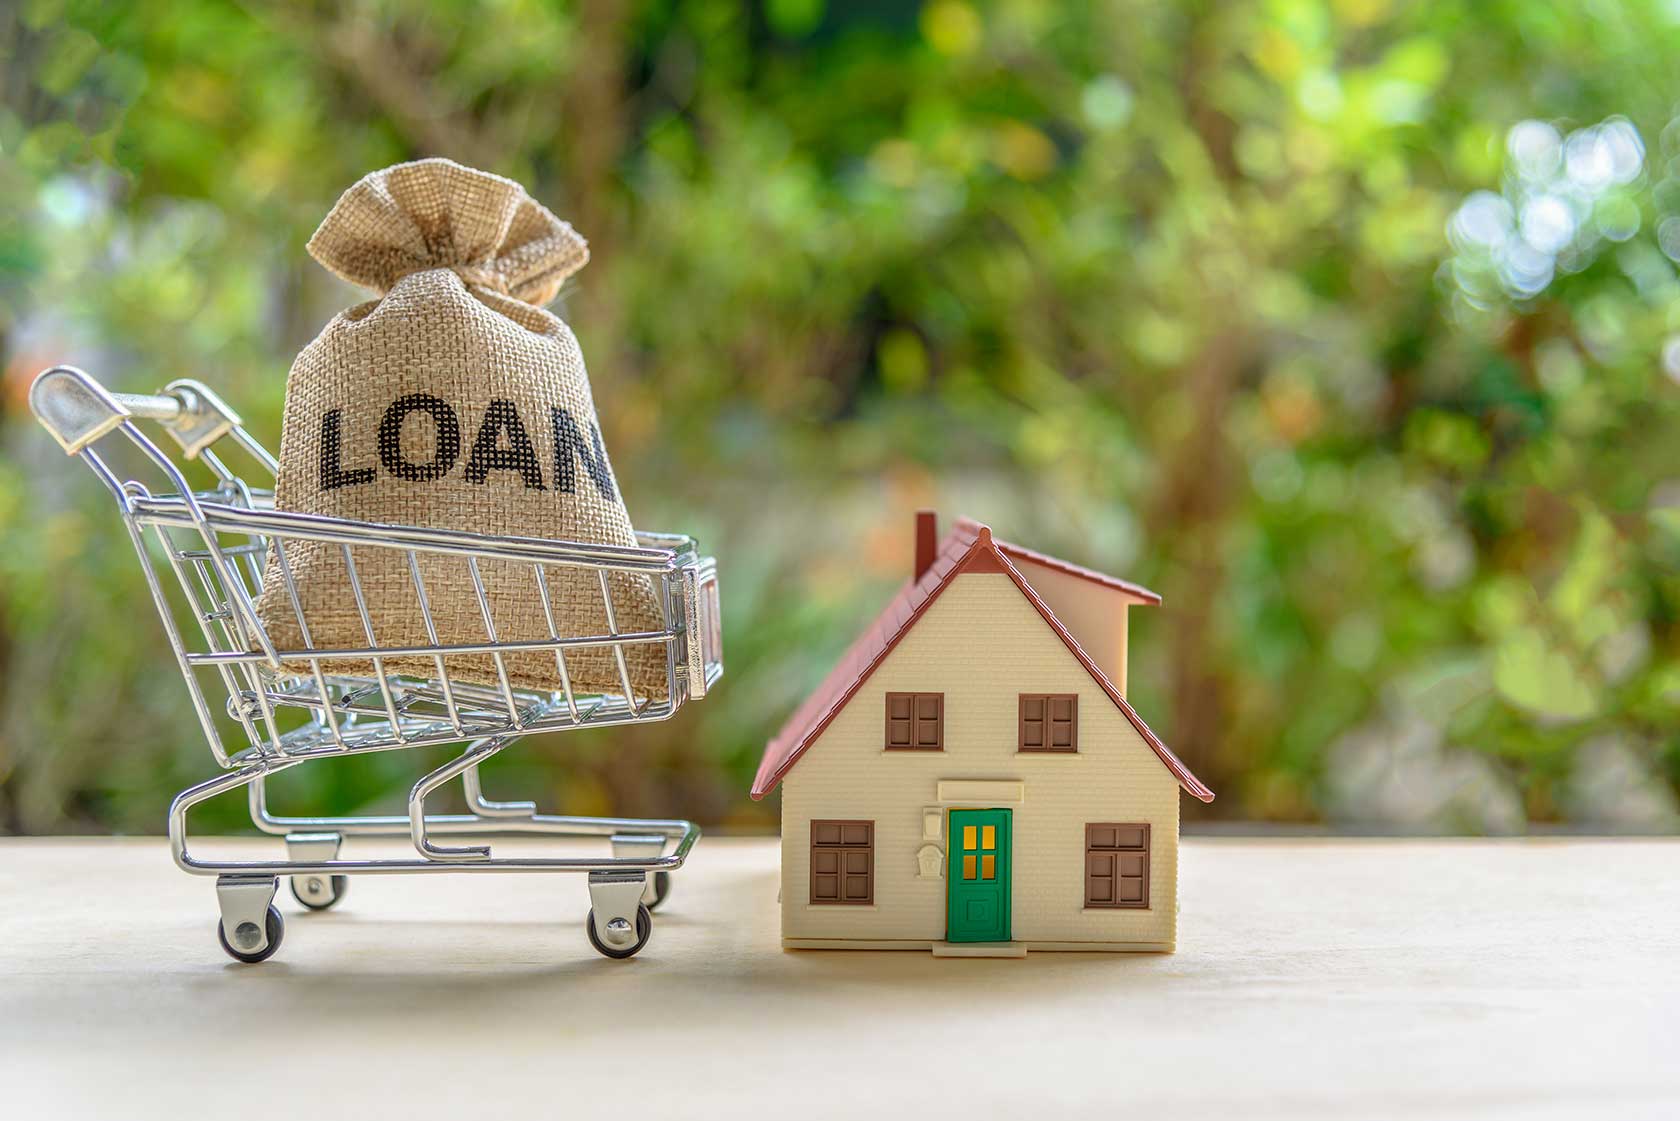 Dealing With The Fundamentals Of DSCR Loan Interest Rates